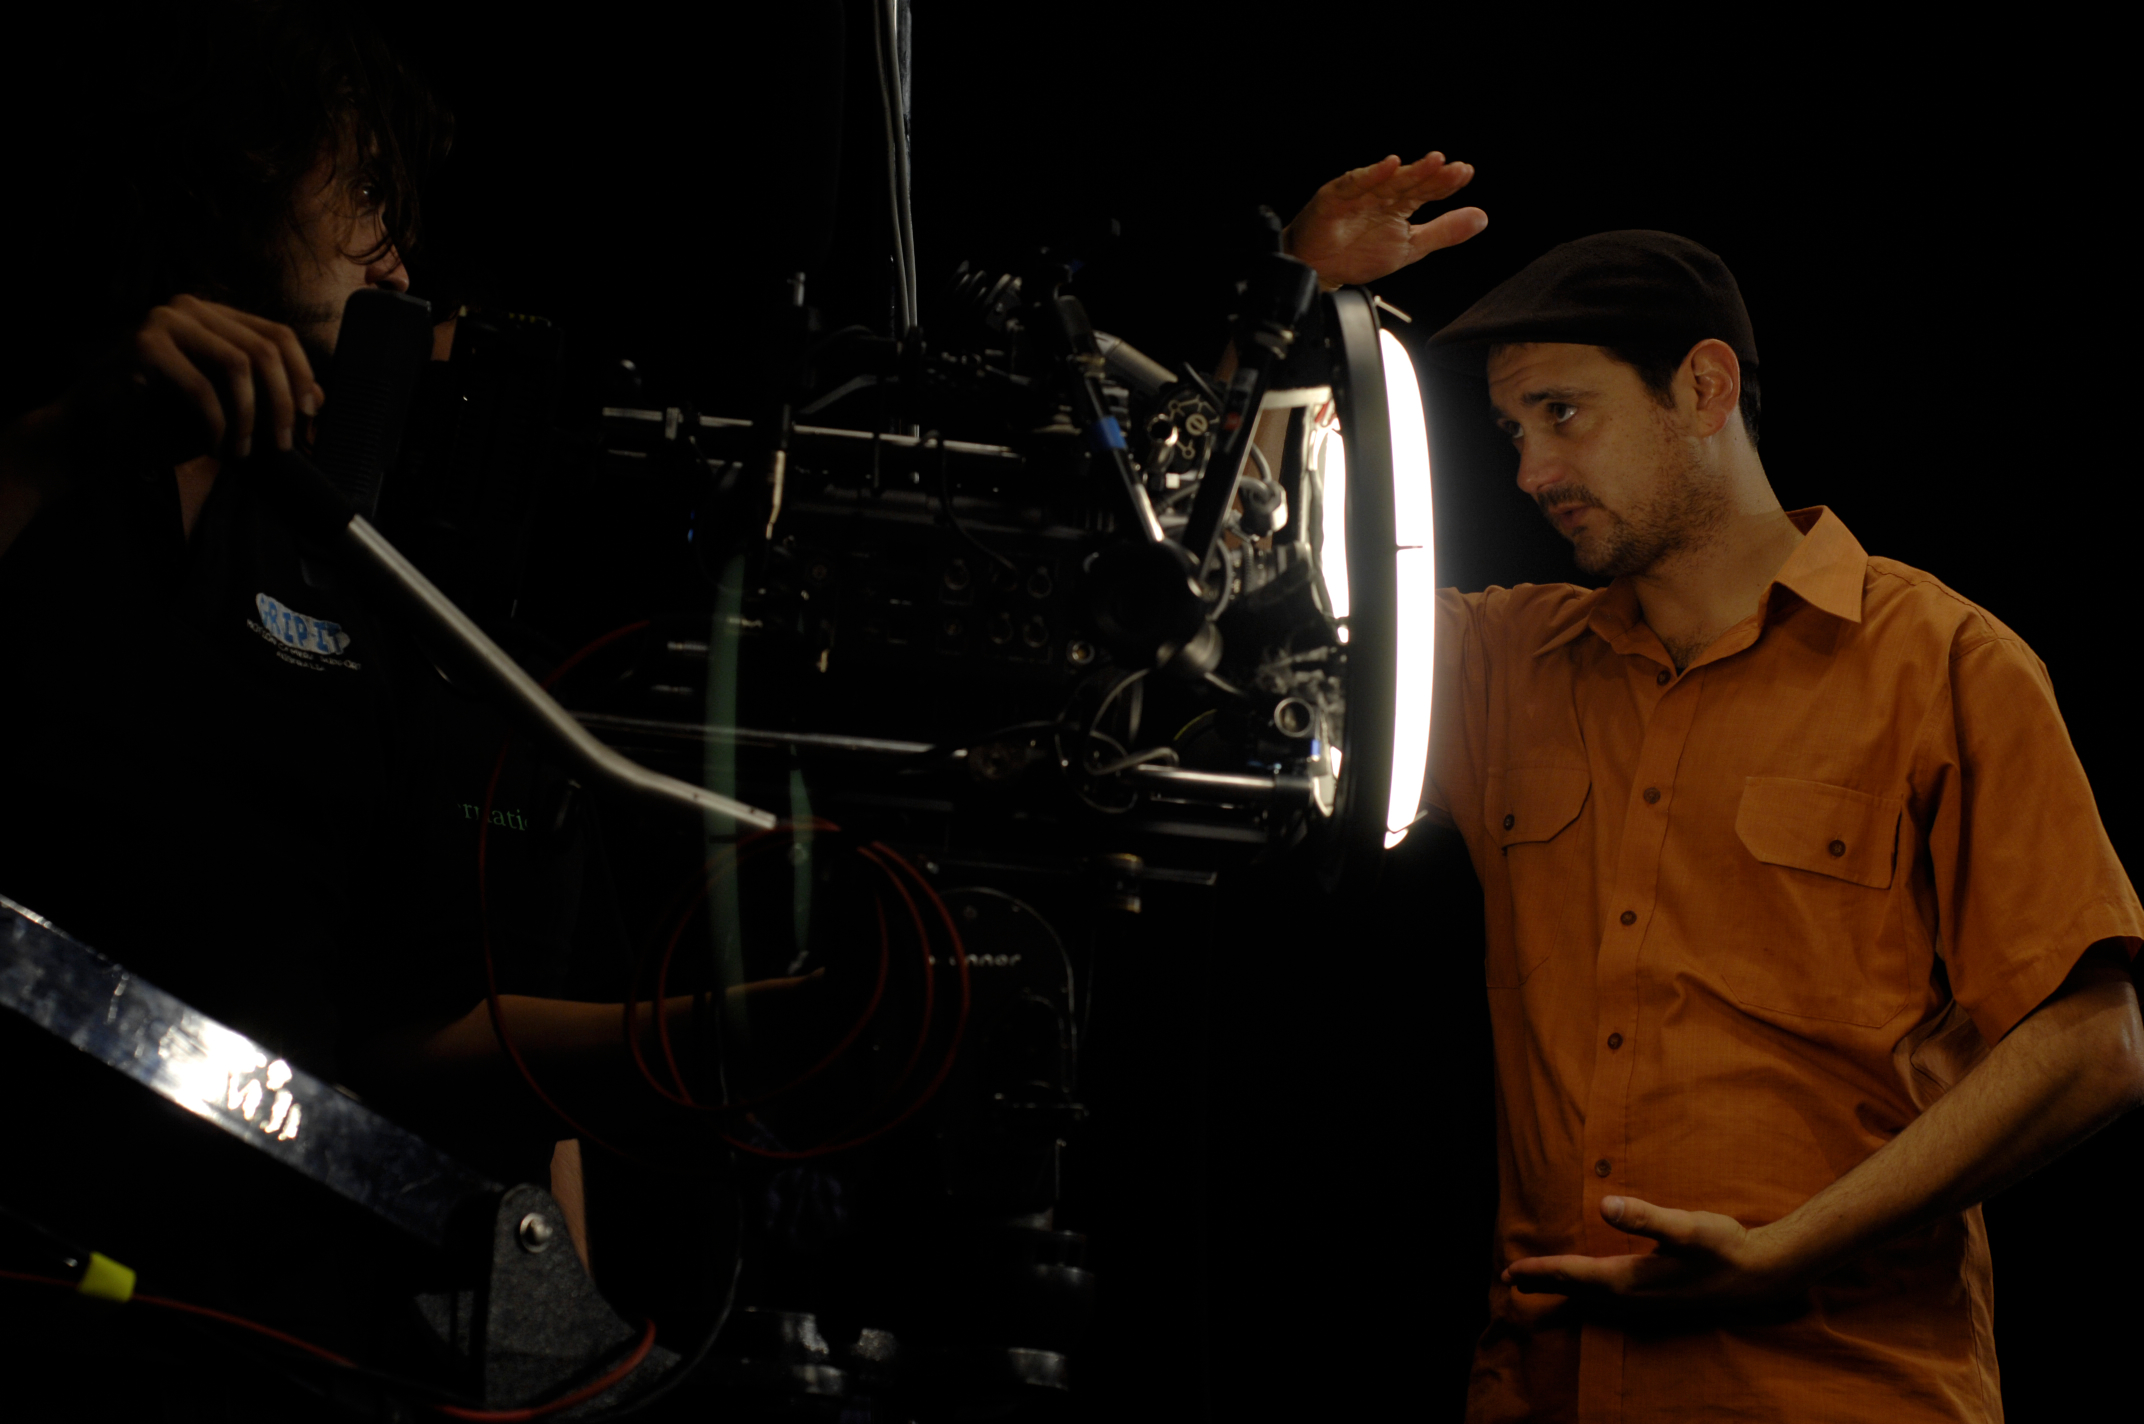 Directing on set for hip hop group Diafrix's Lets Go music video, with cinematographer David Hawkins.